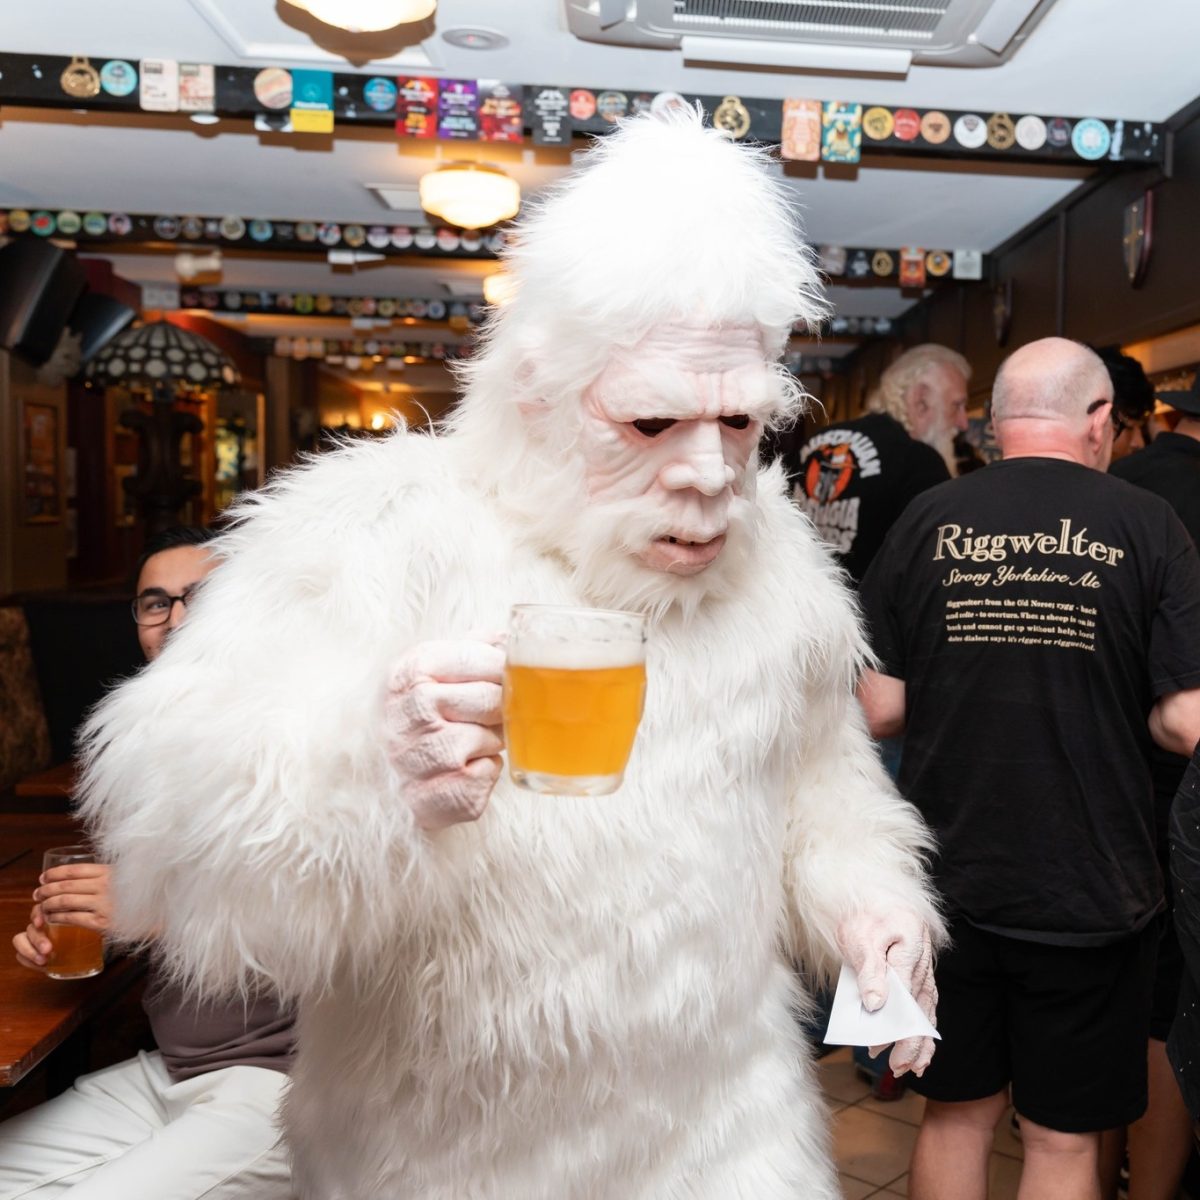 Someone in a white yeti costume holds a pint of beer.